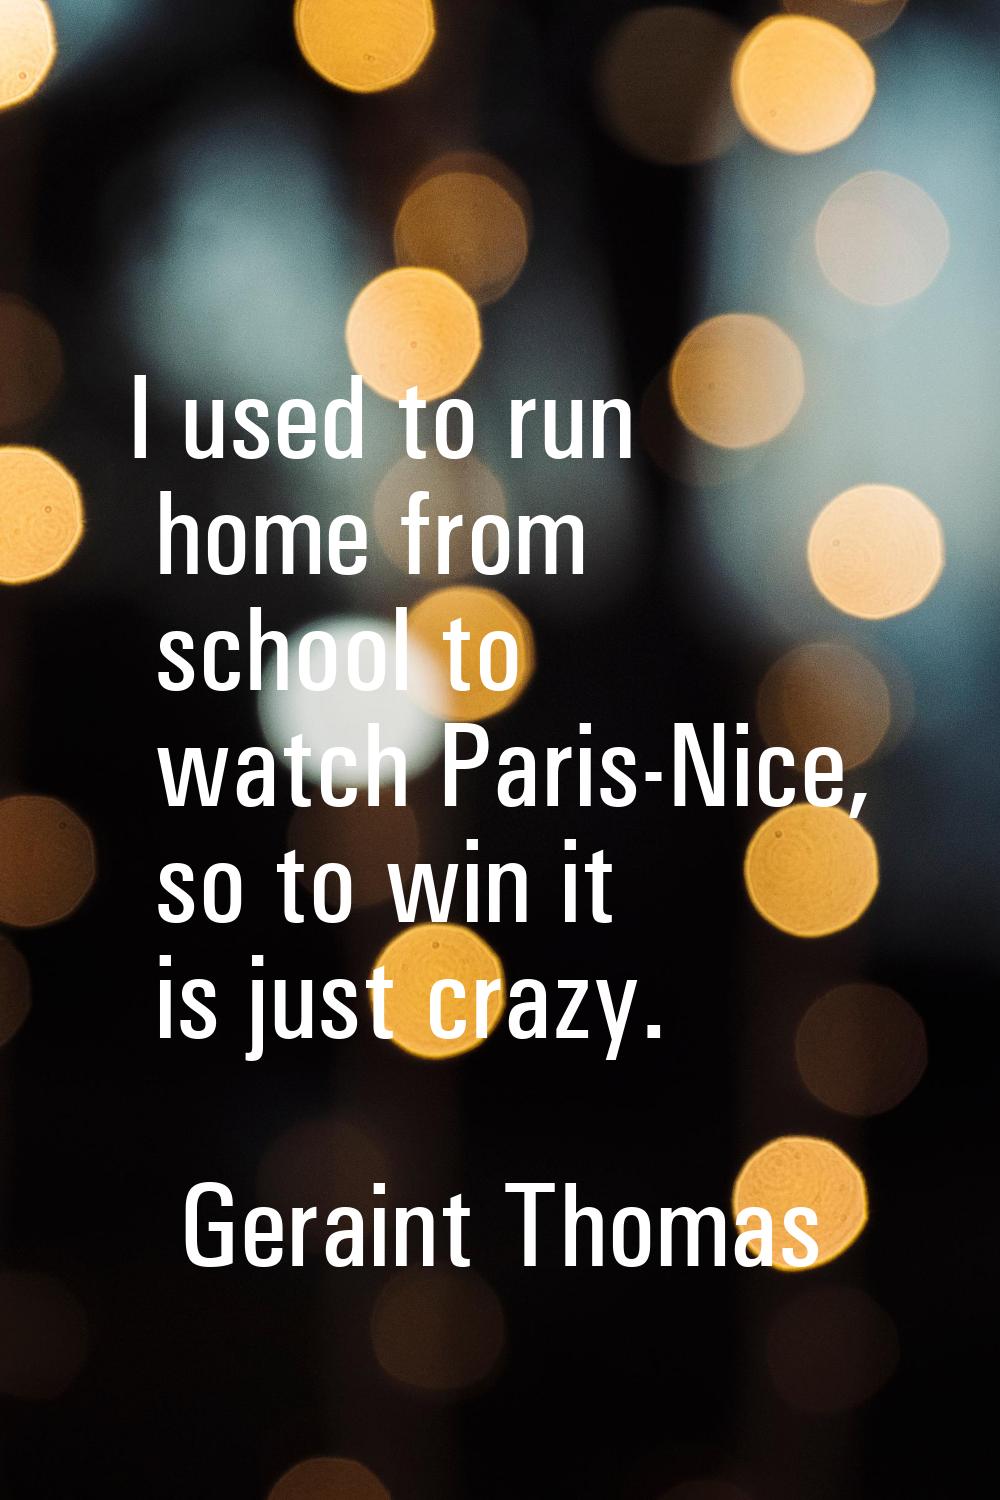 I used to run home from school to watch Paris-Nice, so to win it is just crazy.